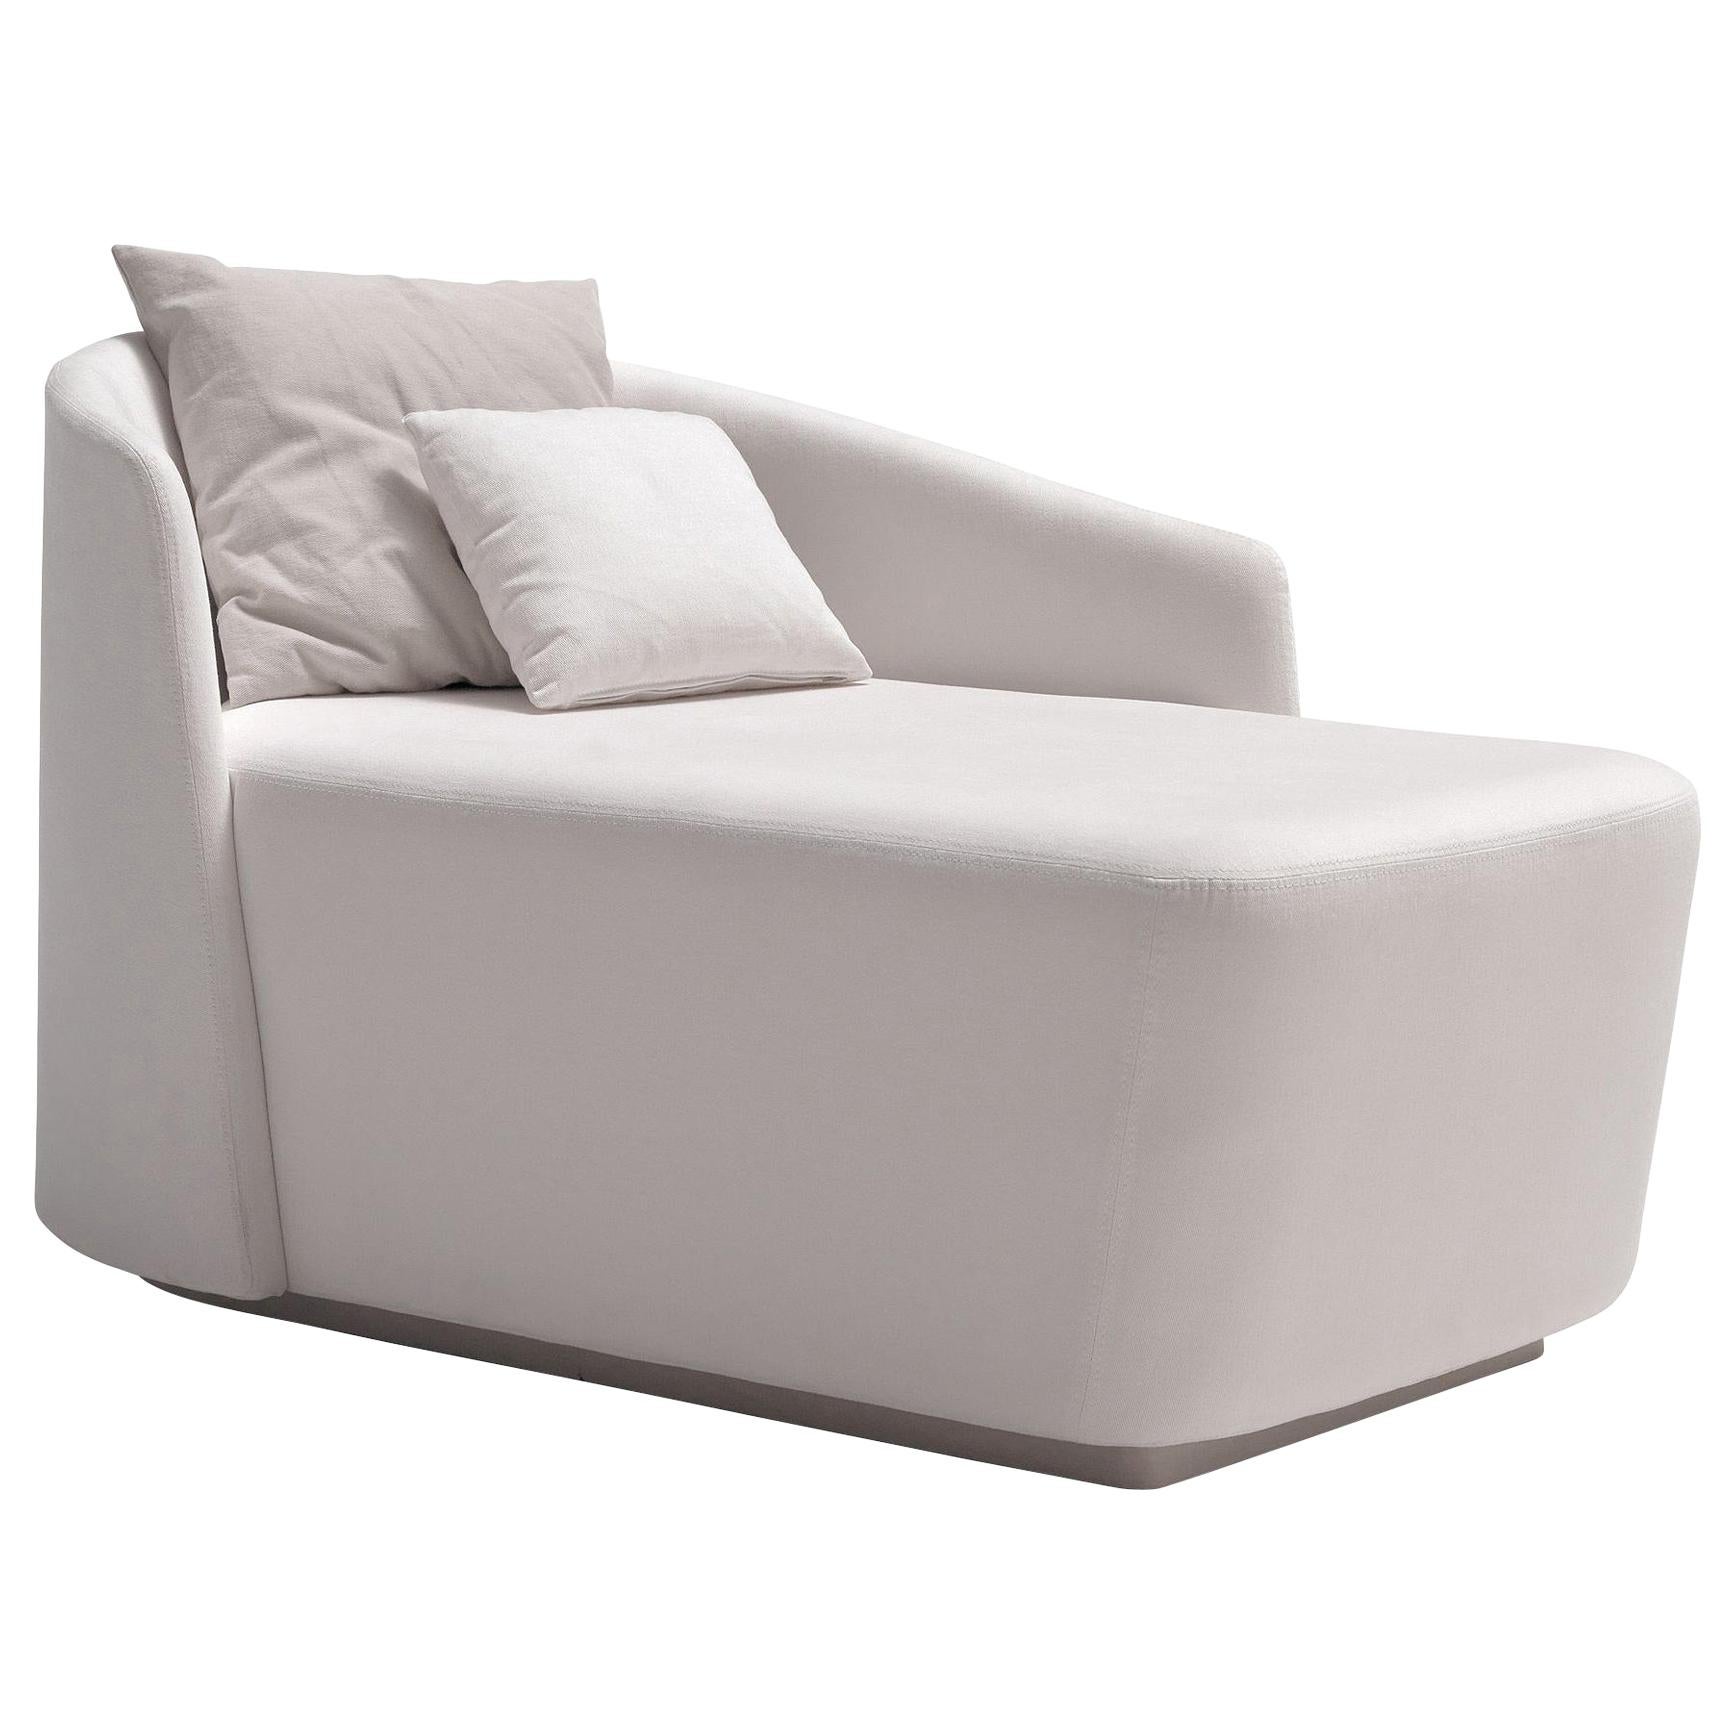 Supernatural Chaise Lounge Sofa Chair by Jorge Pensi For Sale